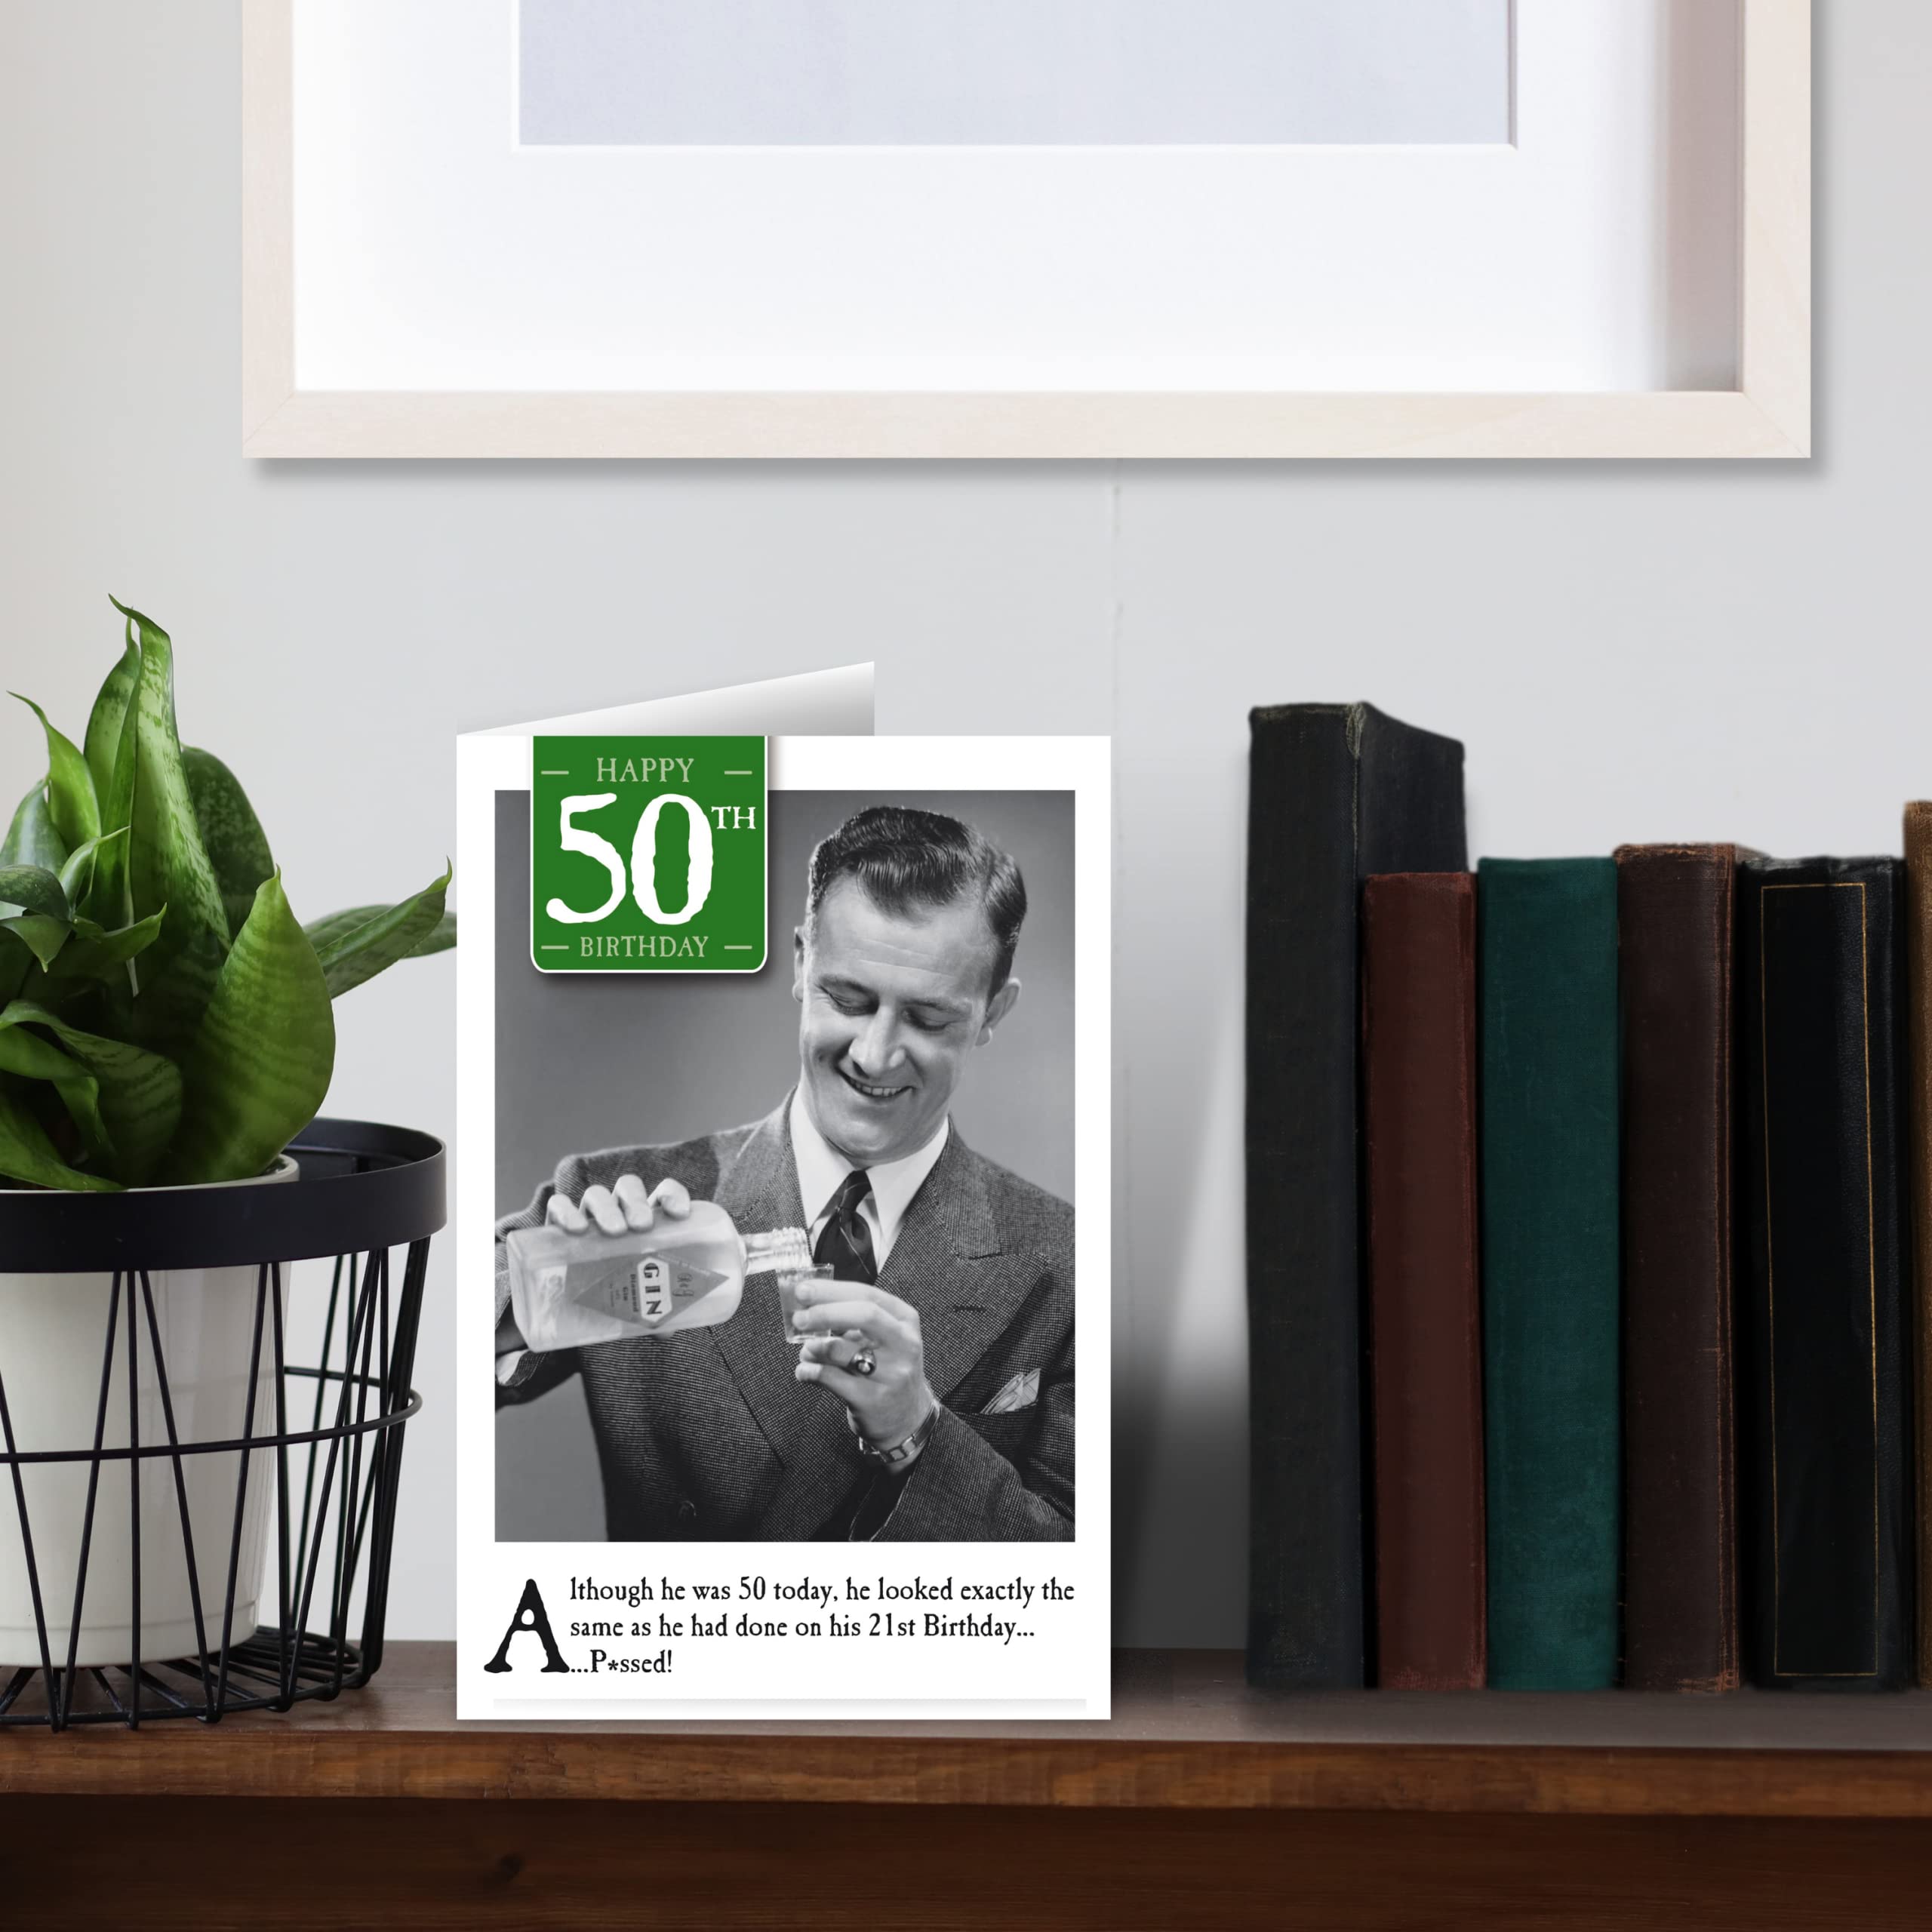 50th Birthday Card For Him, Funny 50th Birthday Day Card For Him, Happy 50th Birthday Card, Age 50 Birthday Card Men, Male 50th Birthday Card, Male 50th Birthday Cards